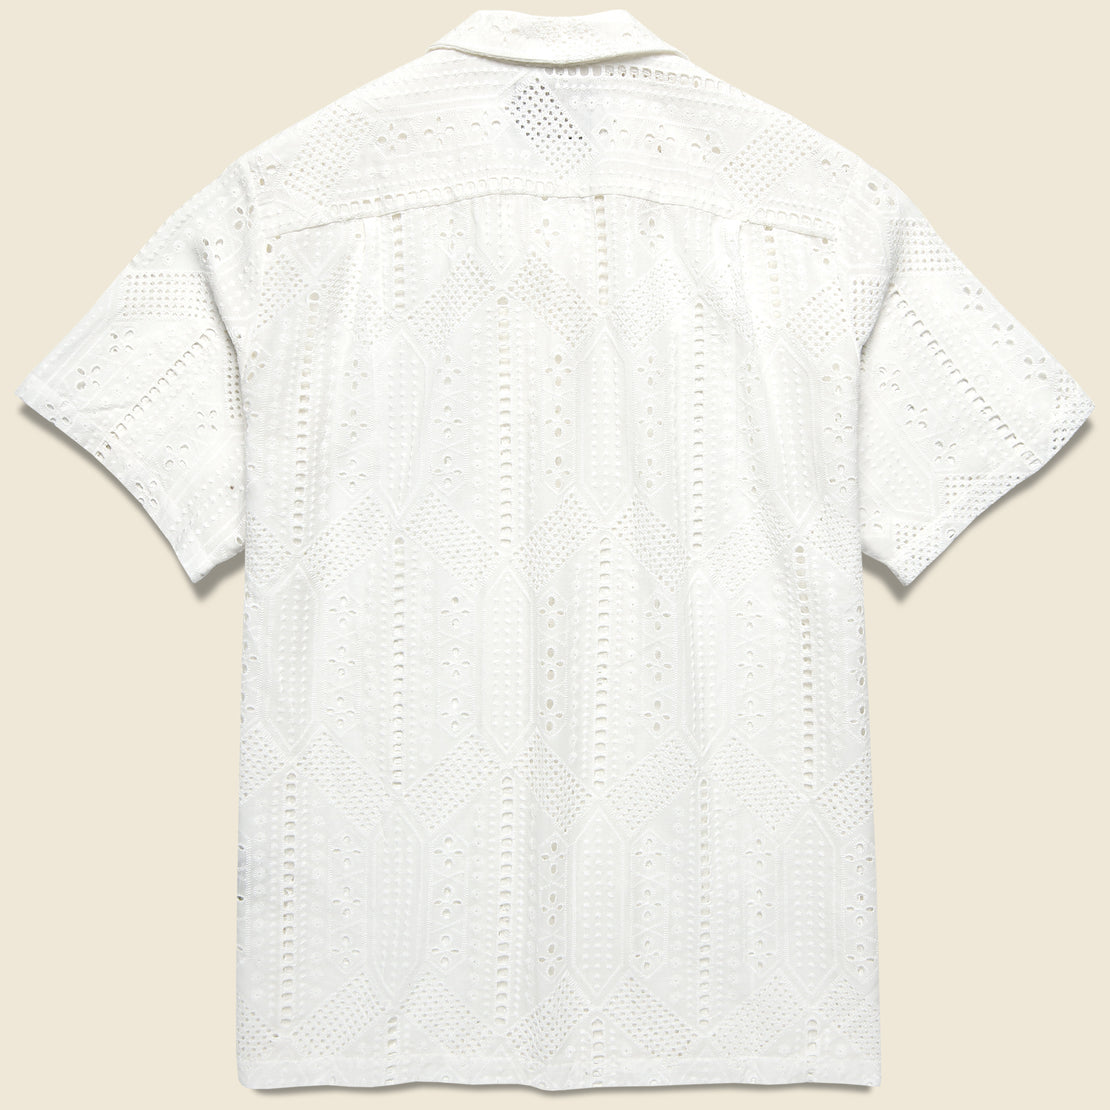 Eyelet Camp Shirt - White - Portuguese Flannel - STAG Provisions - Tops - S/S Woven - Other Pattern